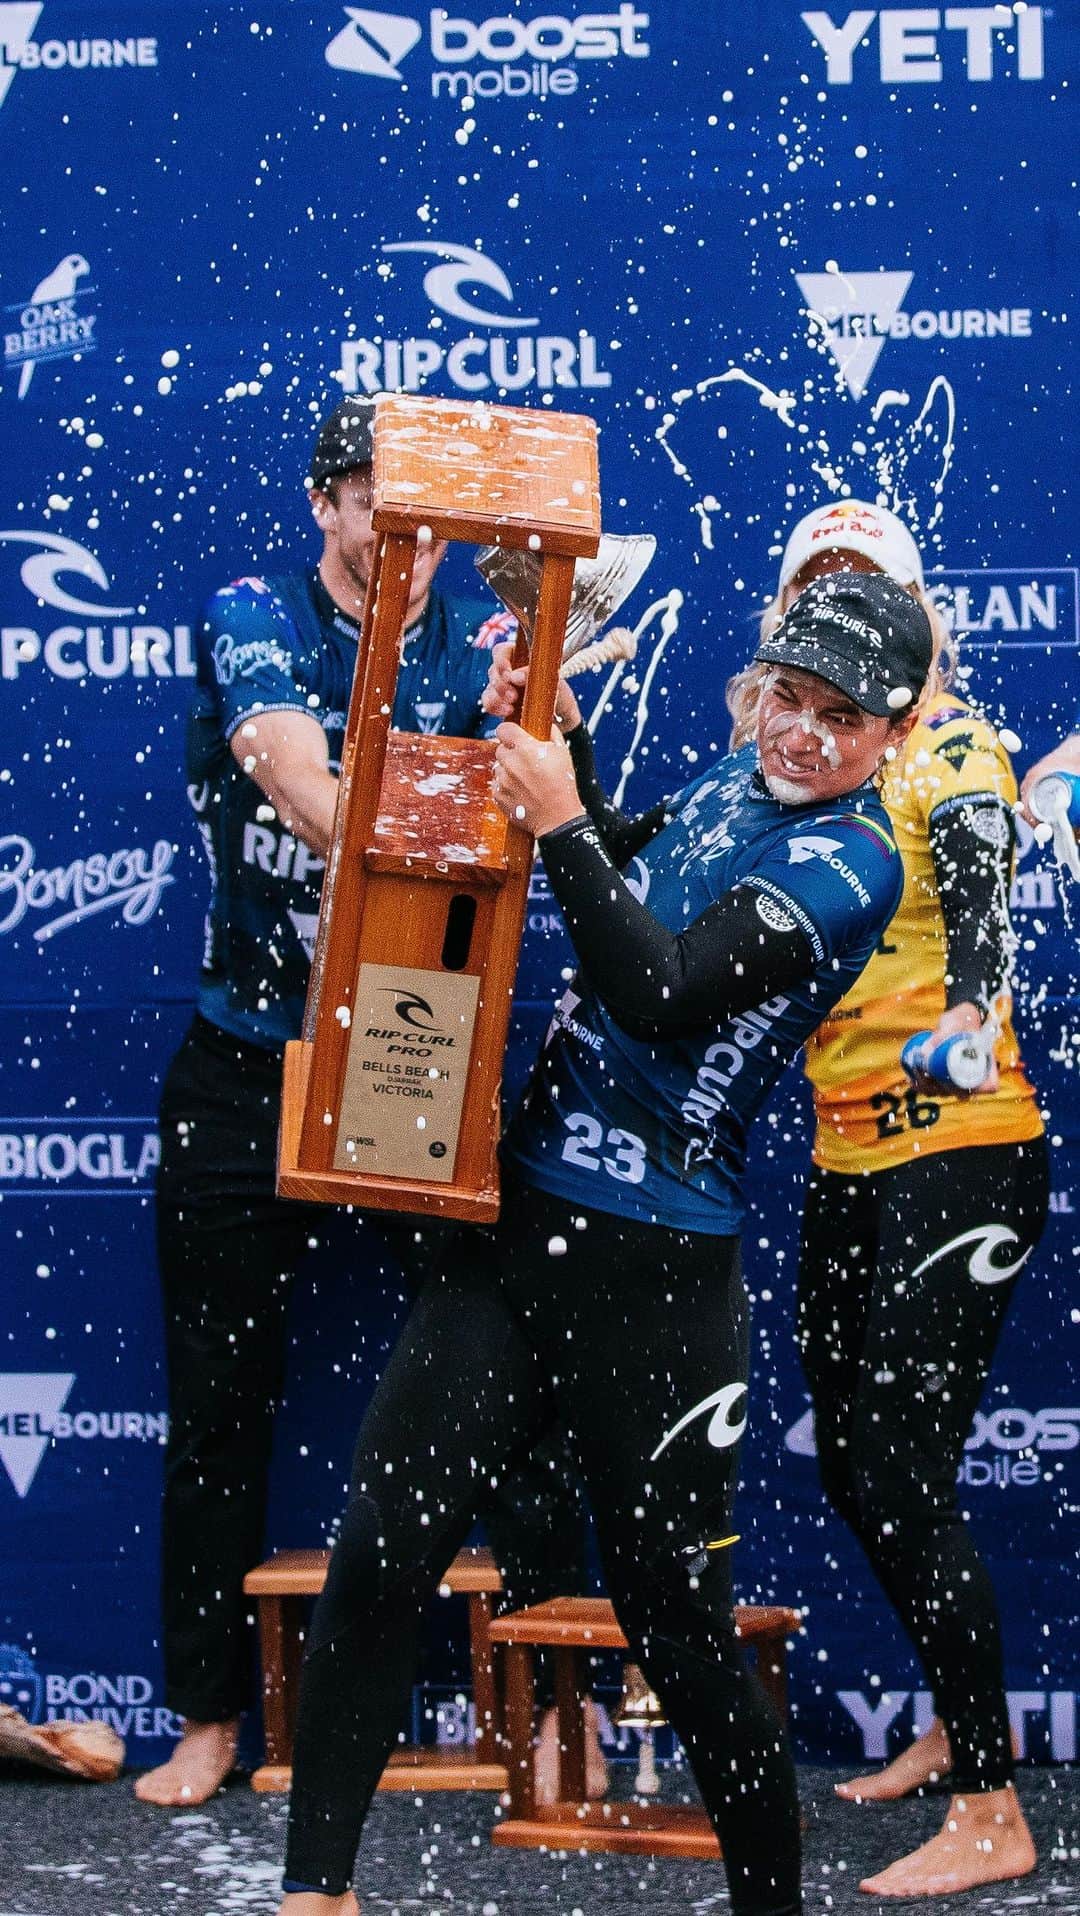 Rip Curl Australiaのインスタグラム：「For the 60th time at the Rip Curl Pro Bells Beach, we ring our champions into history! 🔔   Congratulations @tylerwright & @ethan_ewing!   —  #RipCurl #TylerWright #RipCurlProBellsBeach #BellsBeach #Champions #EthanEwing #WSL #ChampionshipTour #Surfing」